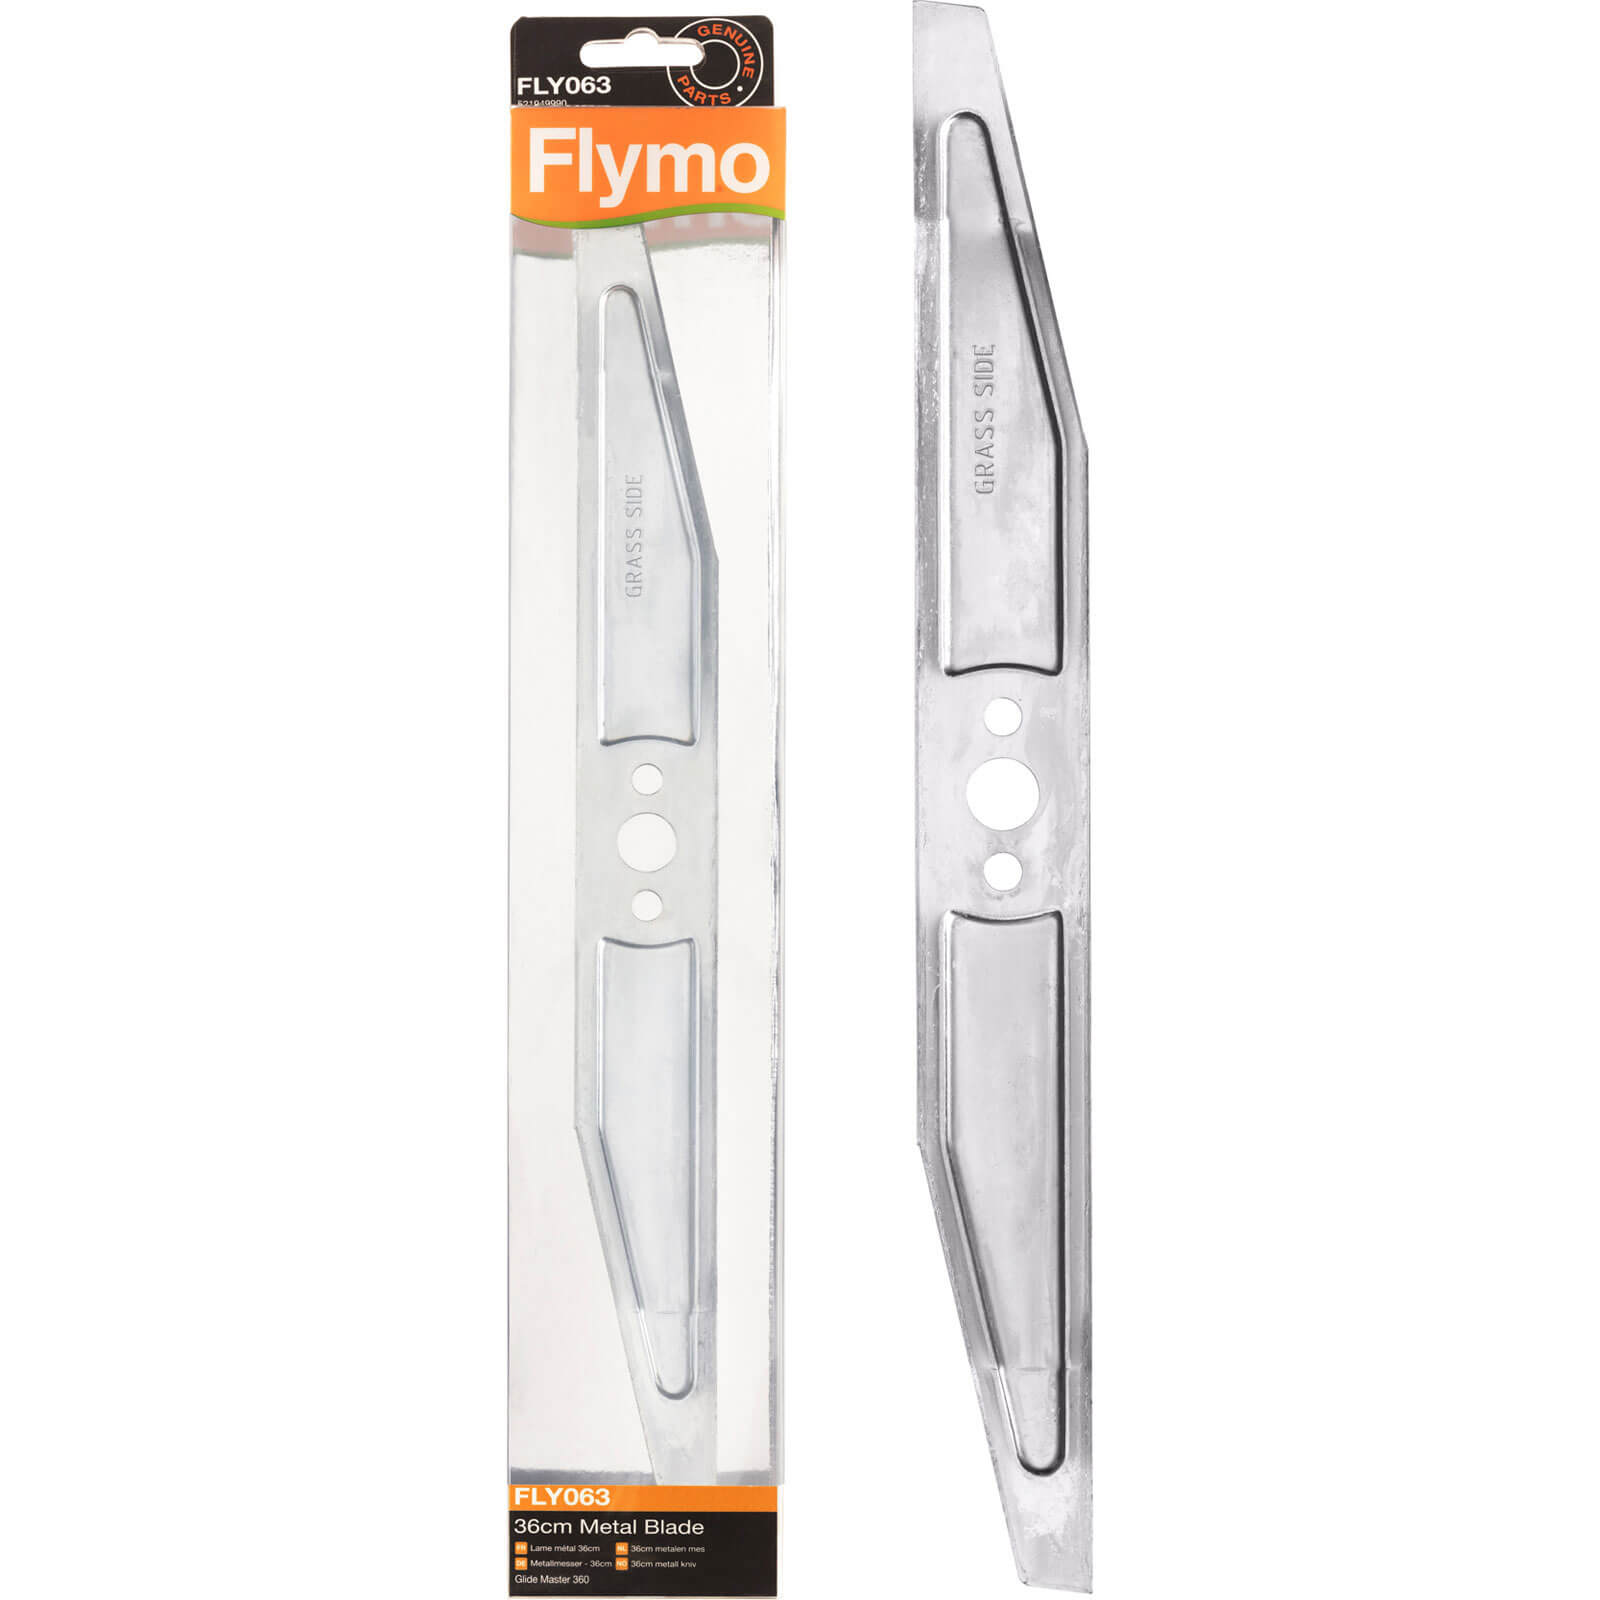 Flymo FLY063 Genuine Blade for Glidemaster 360 Lawnmowers 360mm Pack of 1